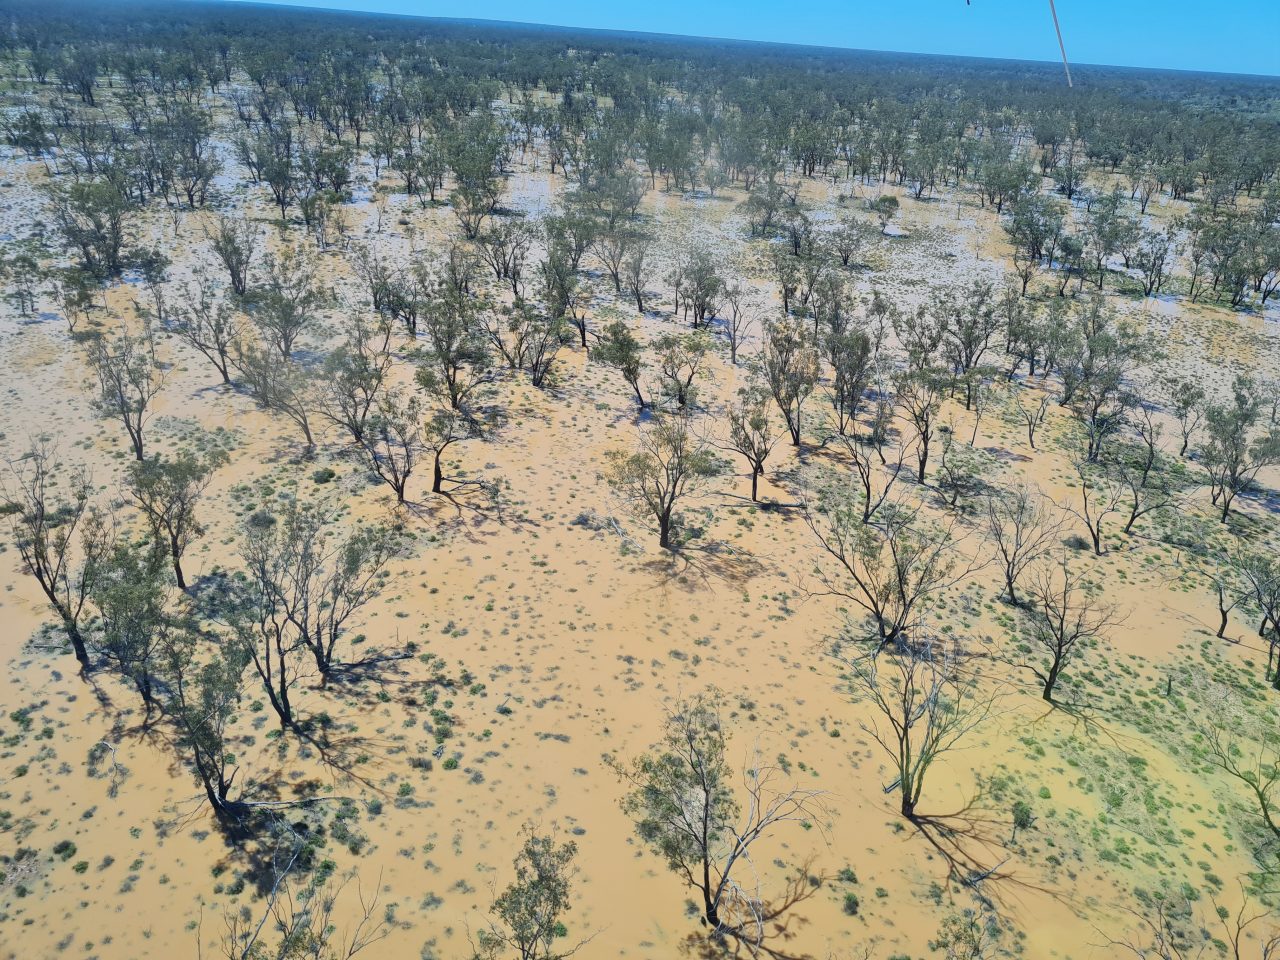 Aerial photo of  trees and ground vegetation being inundated by a shallow flow of orange water